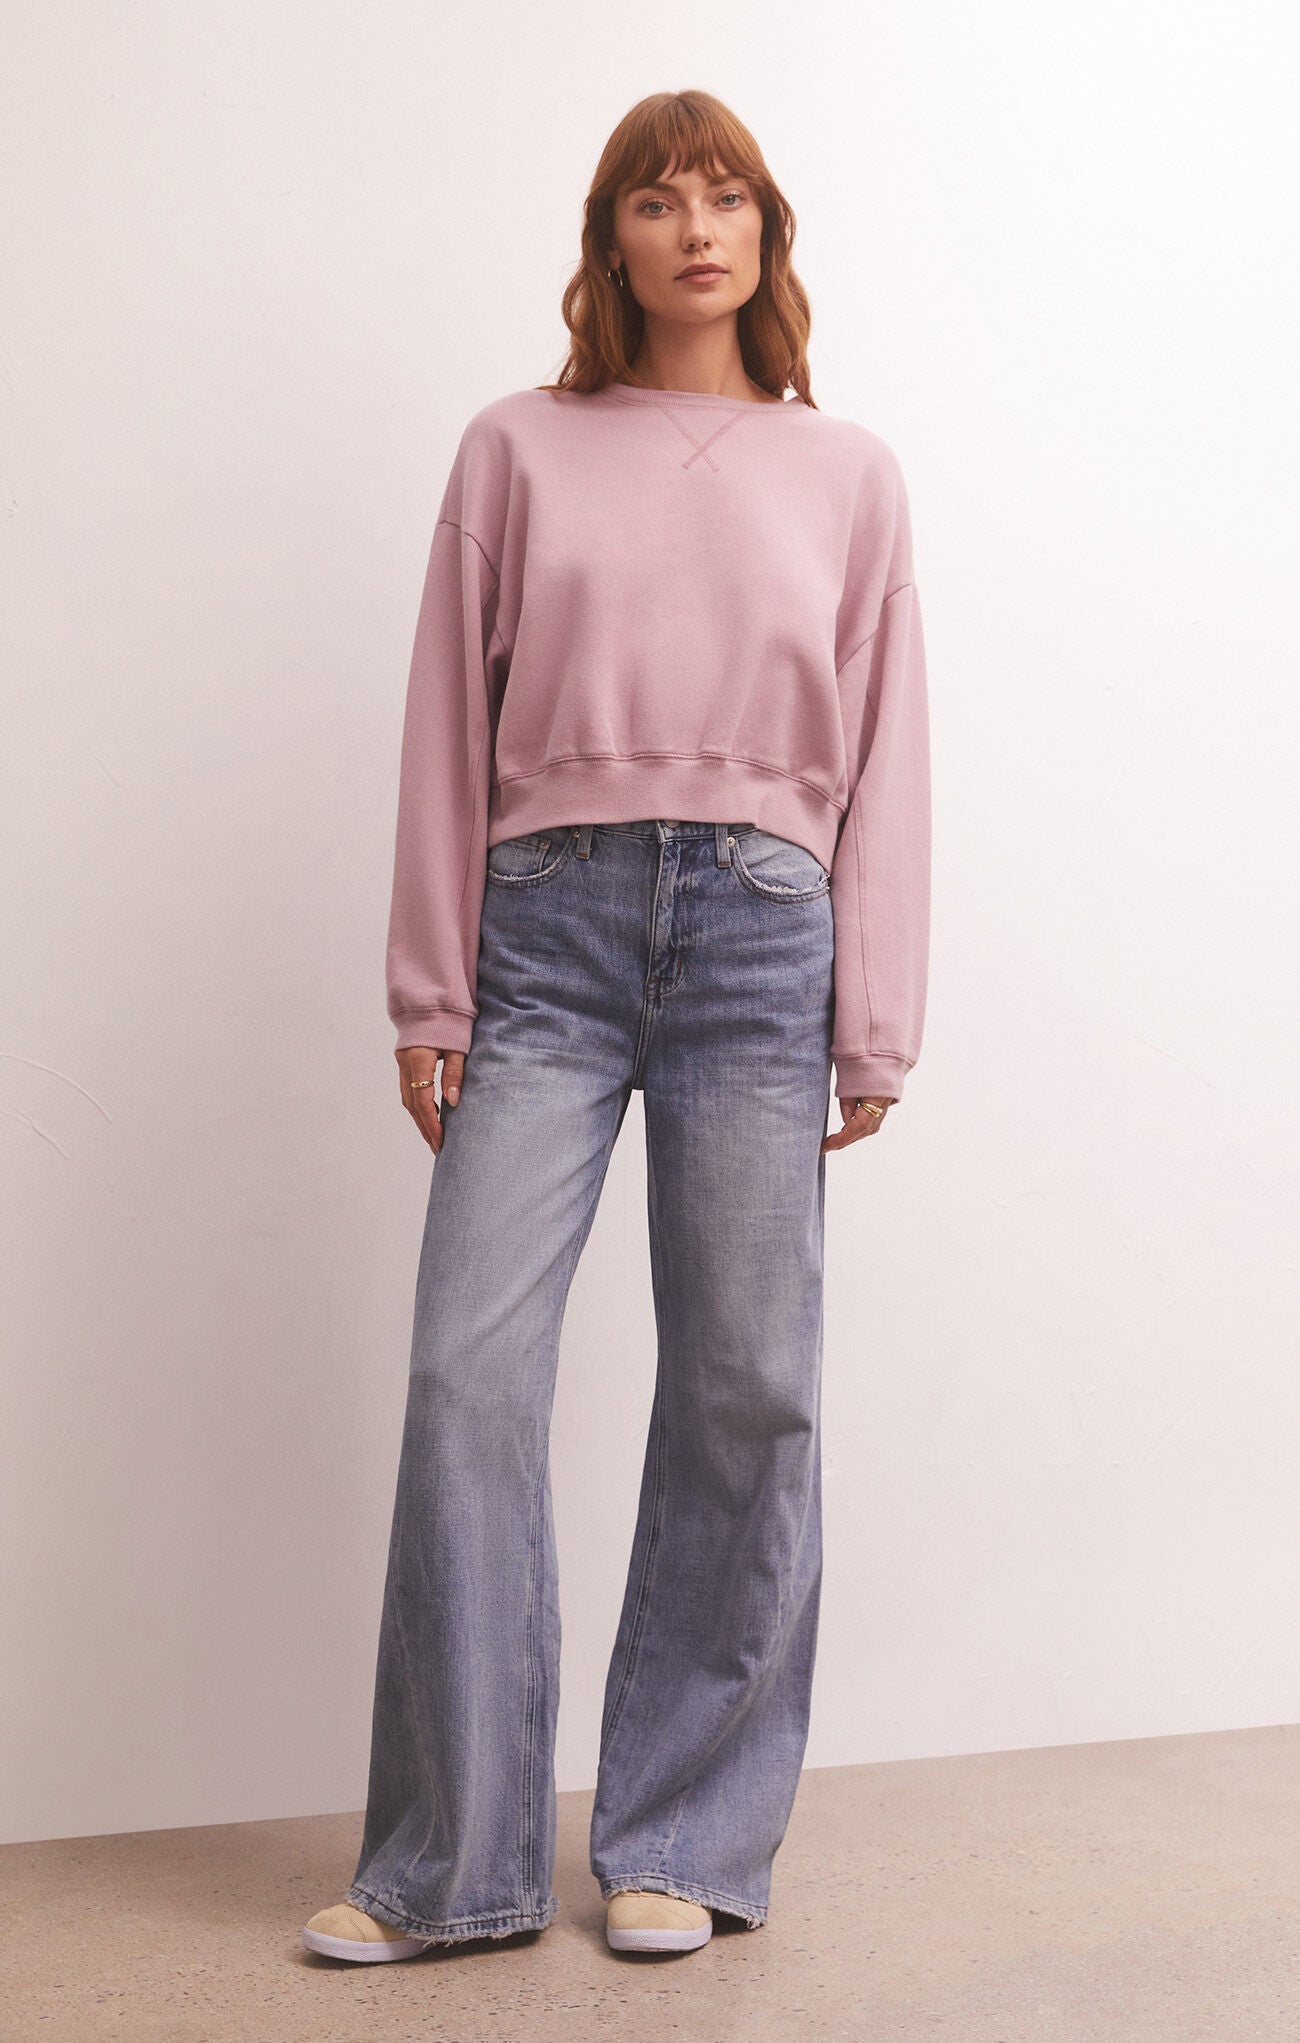 Model image of crewneck in pink wearing jeans